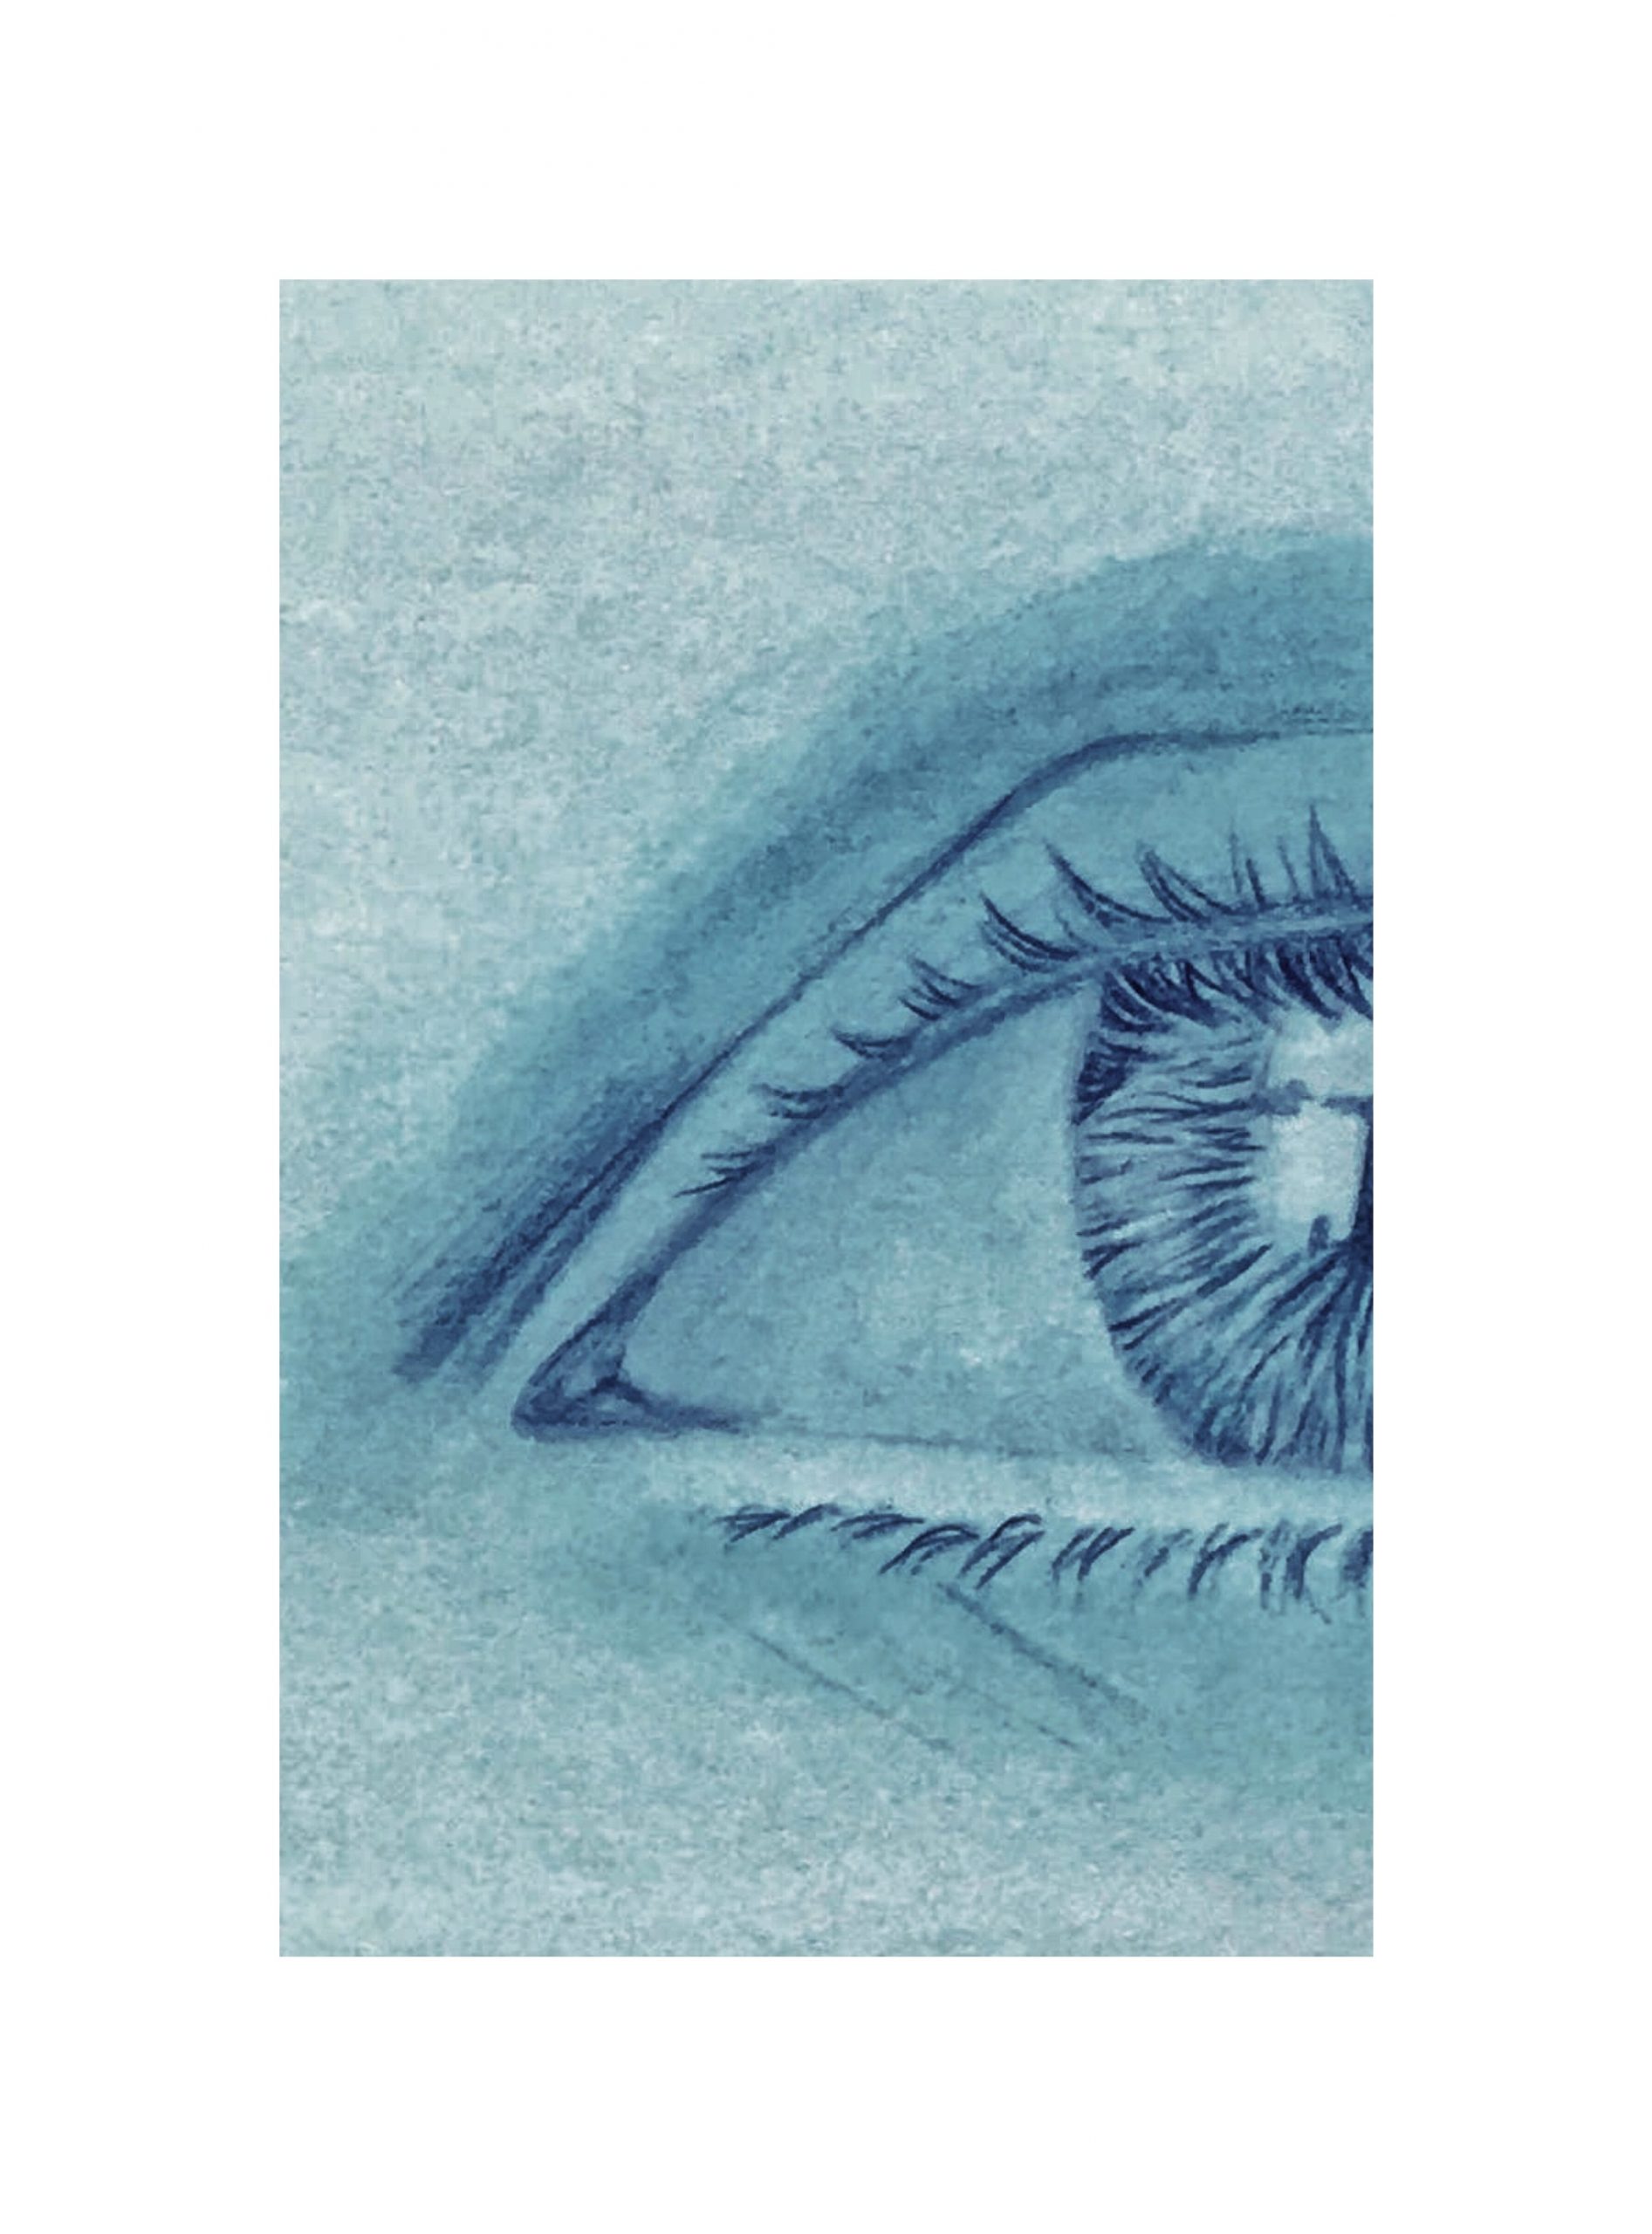 study of eye’s details